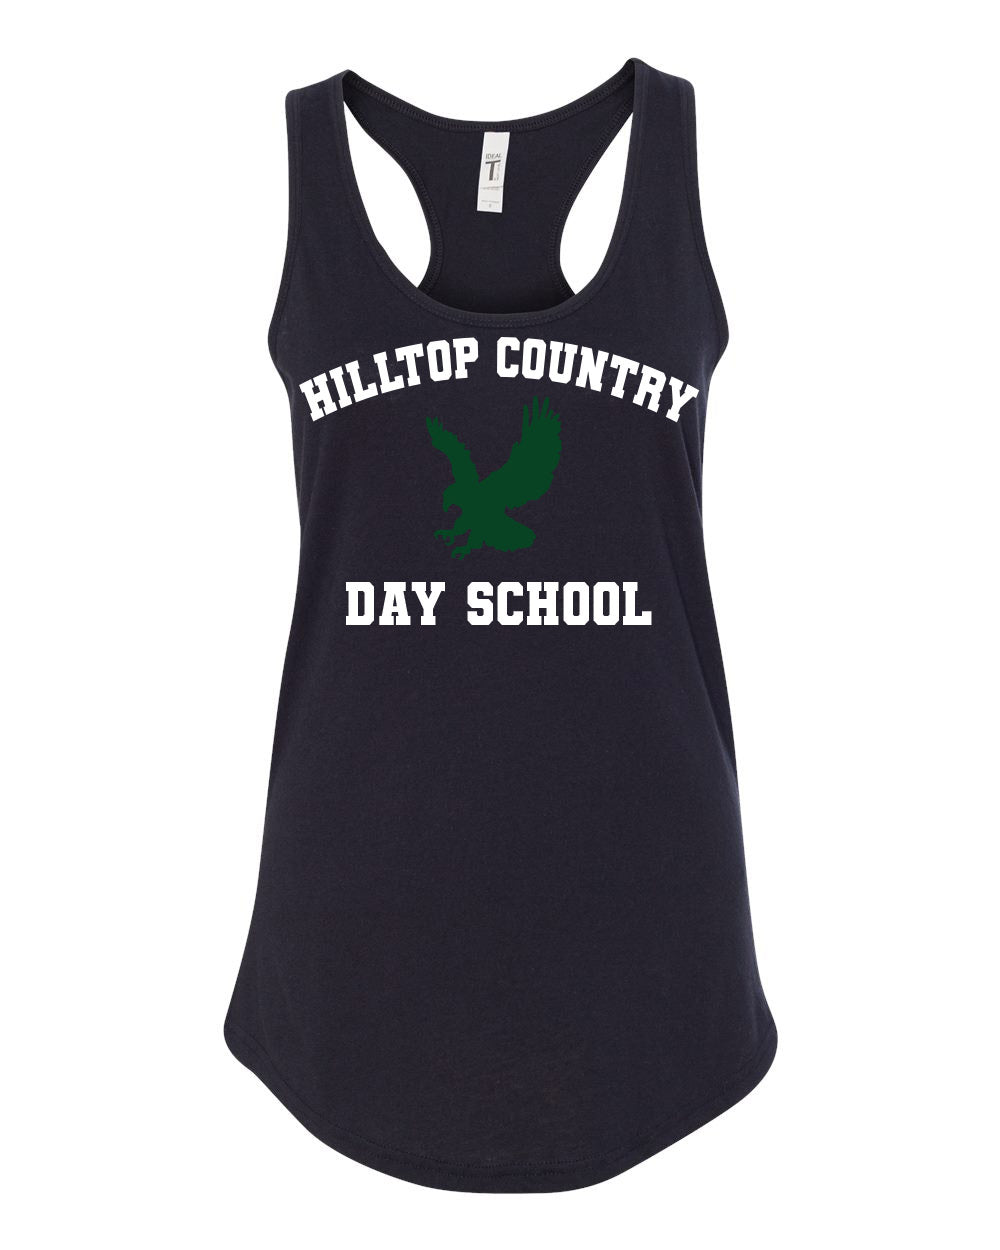 Hilltop Country Day School design 1 Tank Top